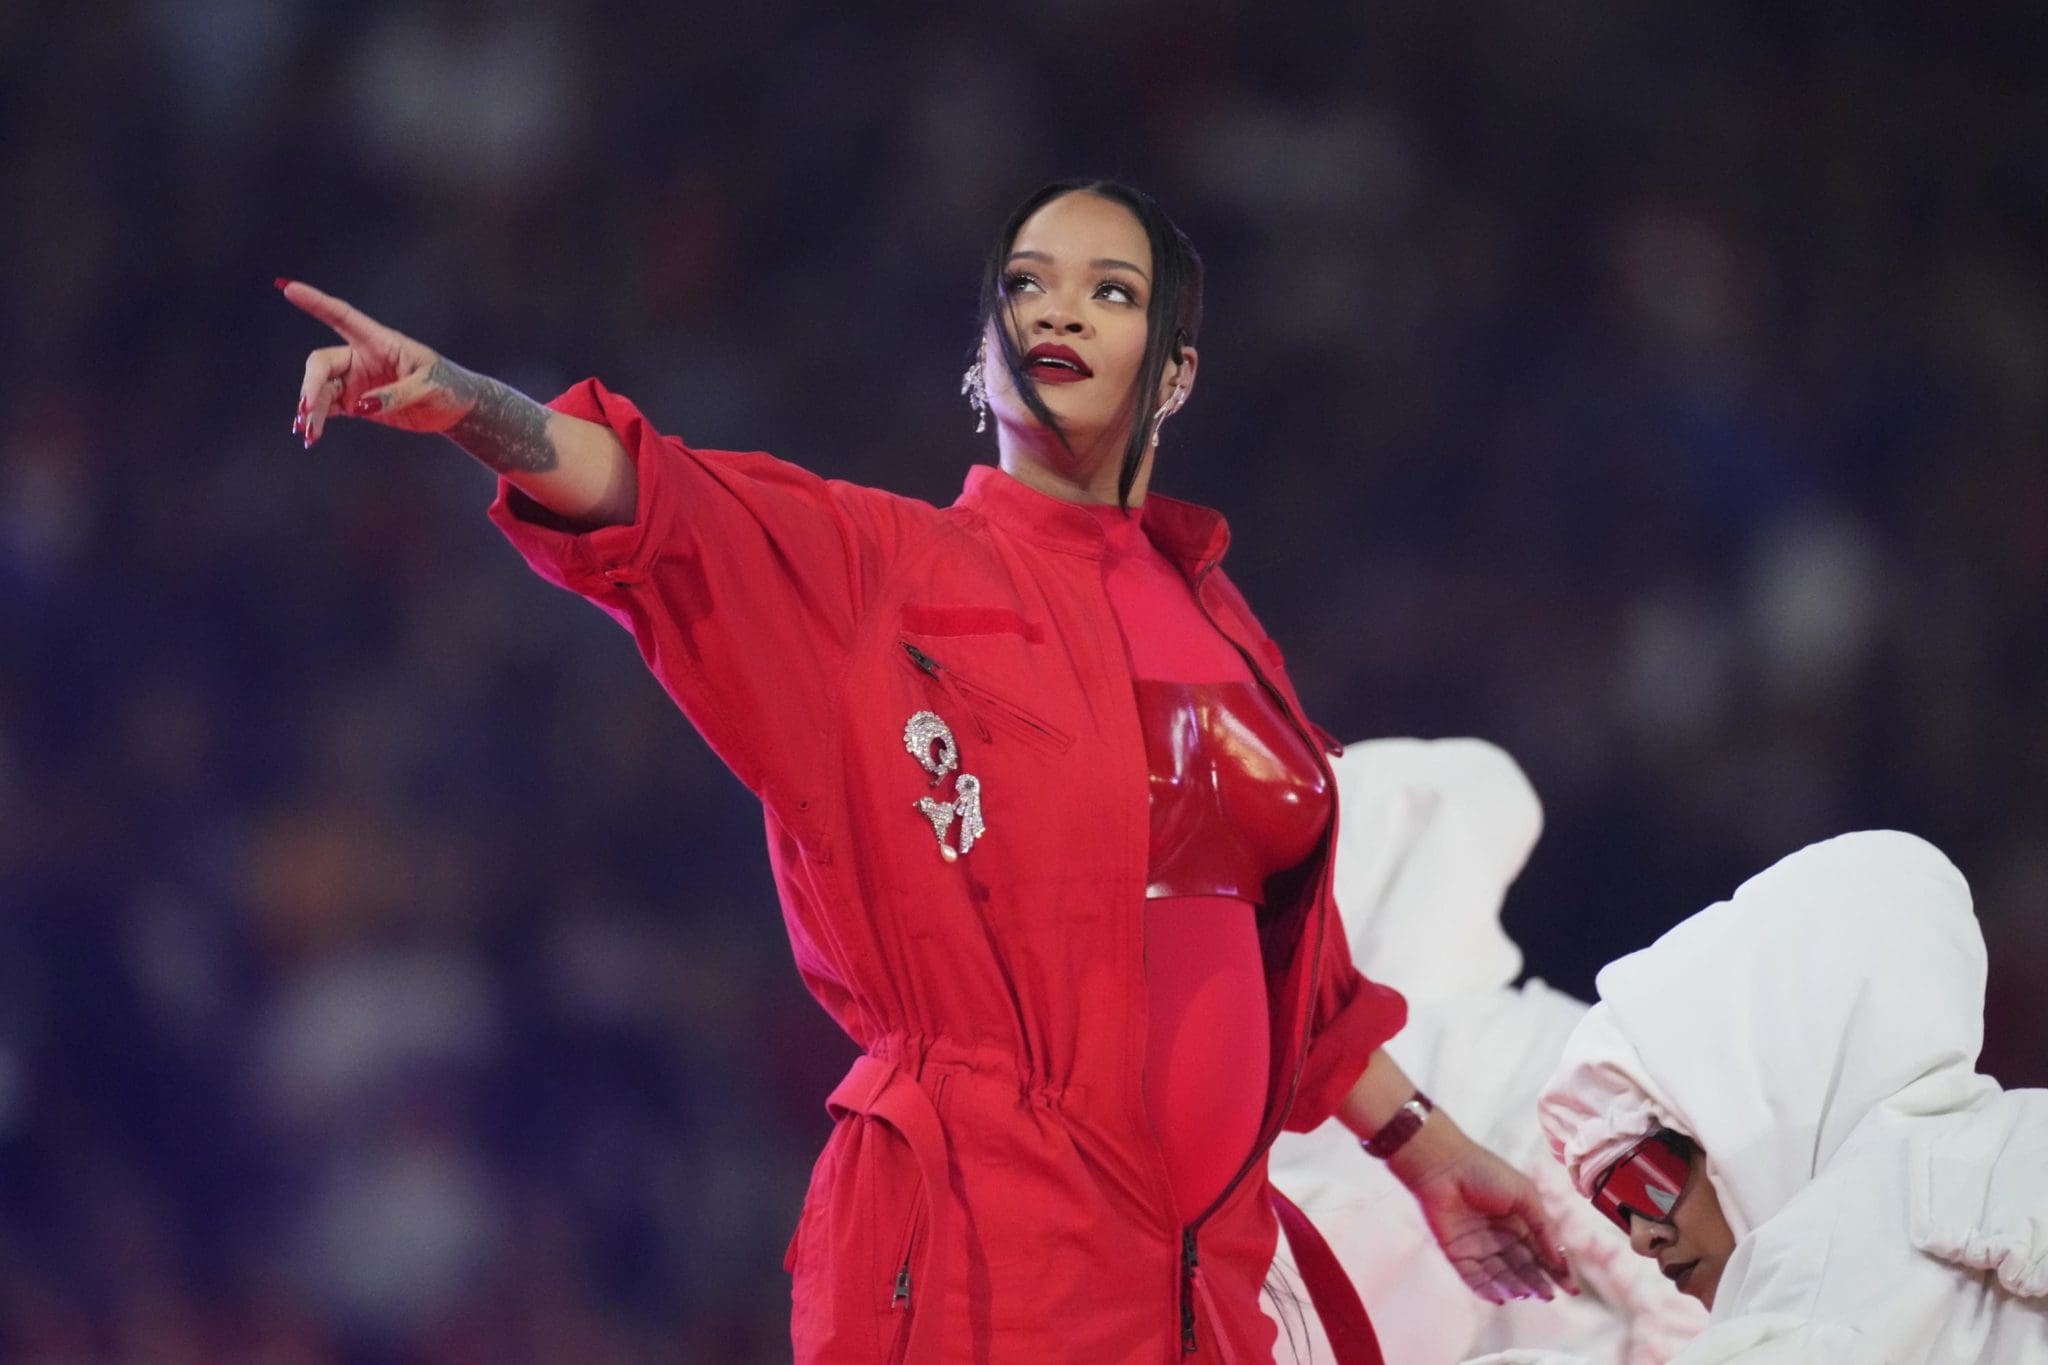 Rihanna's Super Bowl Performance Most Watched Halftime Show